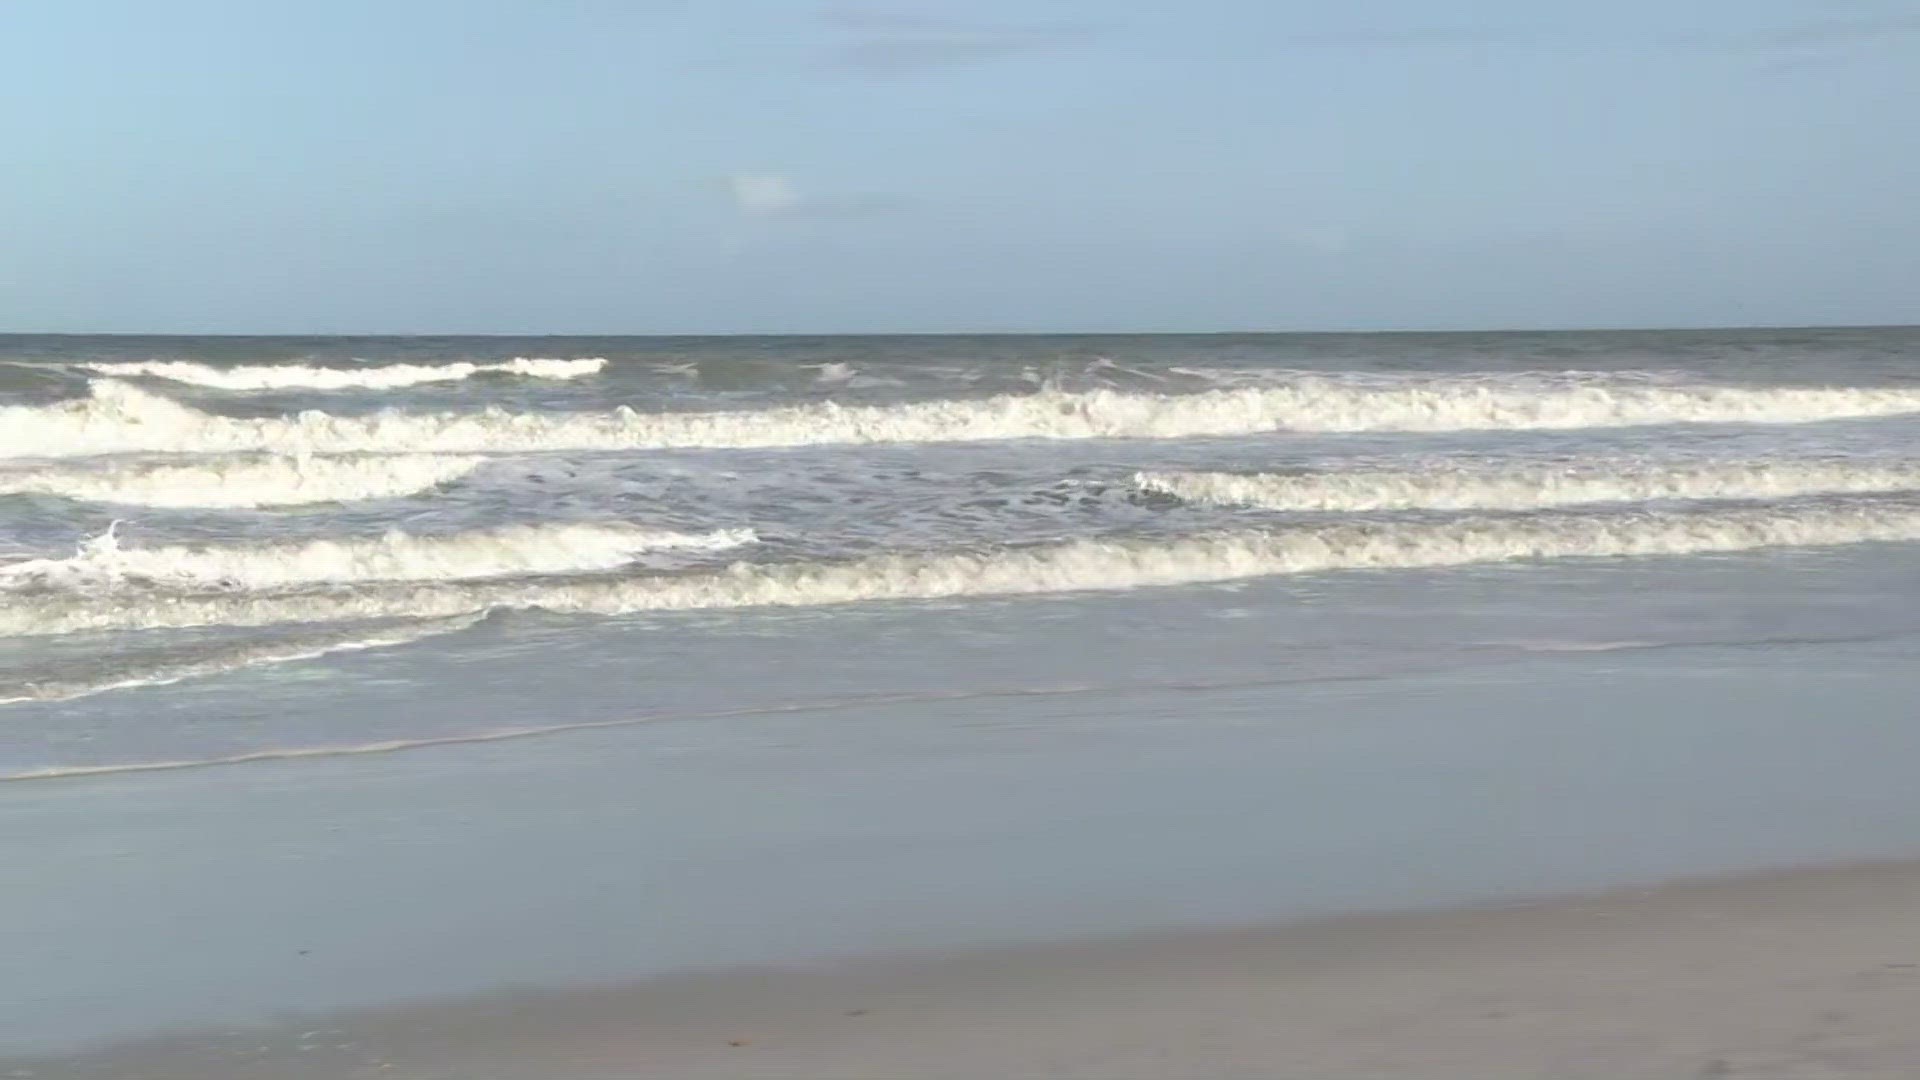 Jacksonville Beach Ocean Rescue said the woman was taken to the hospital in critical condition Wednesday afternoon.